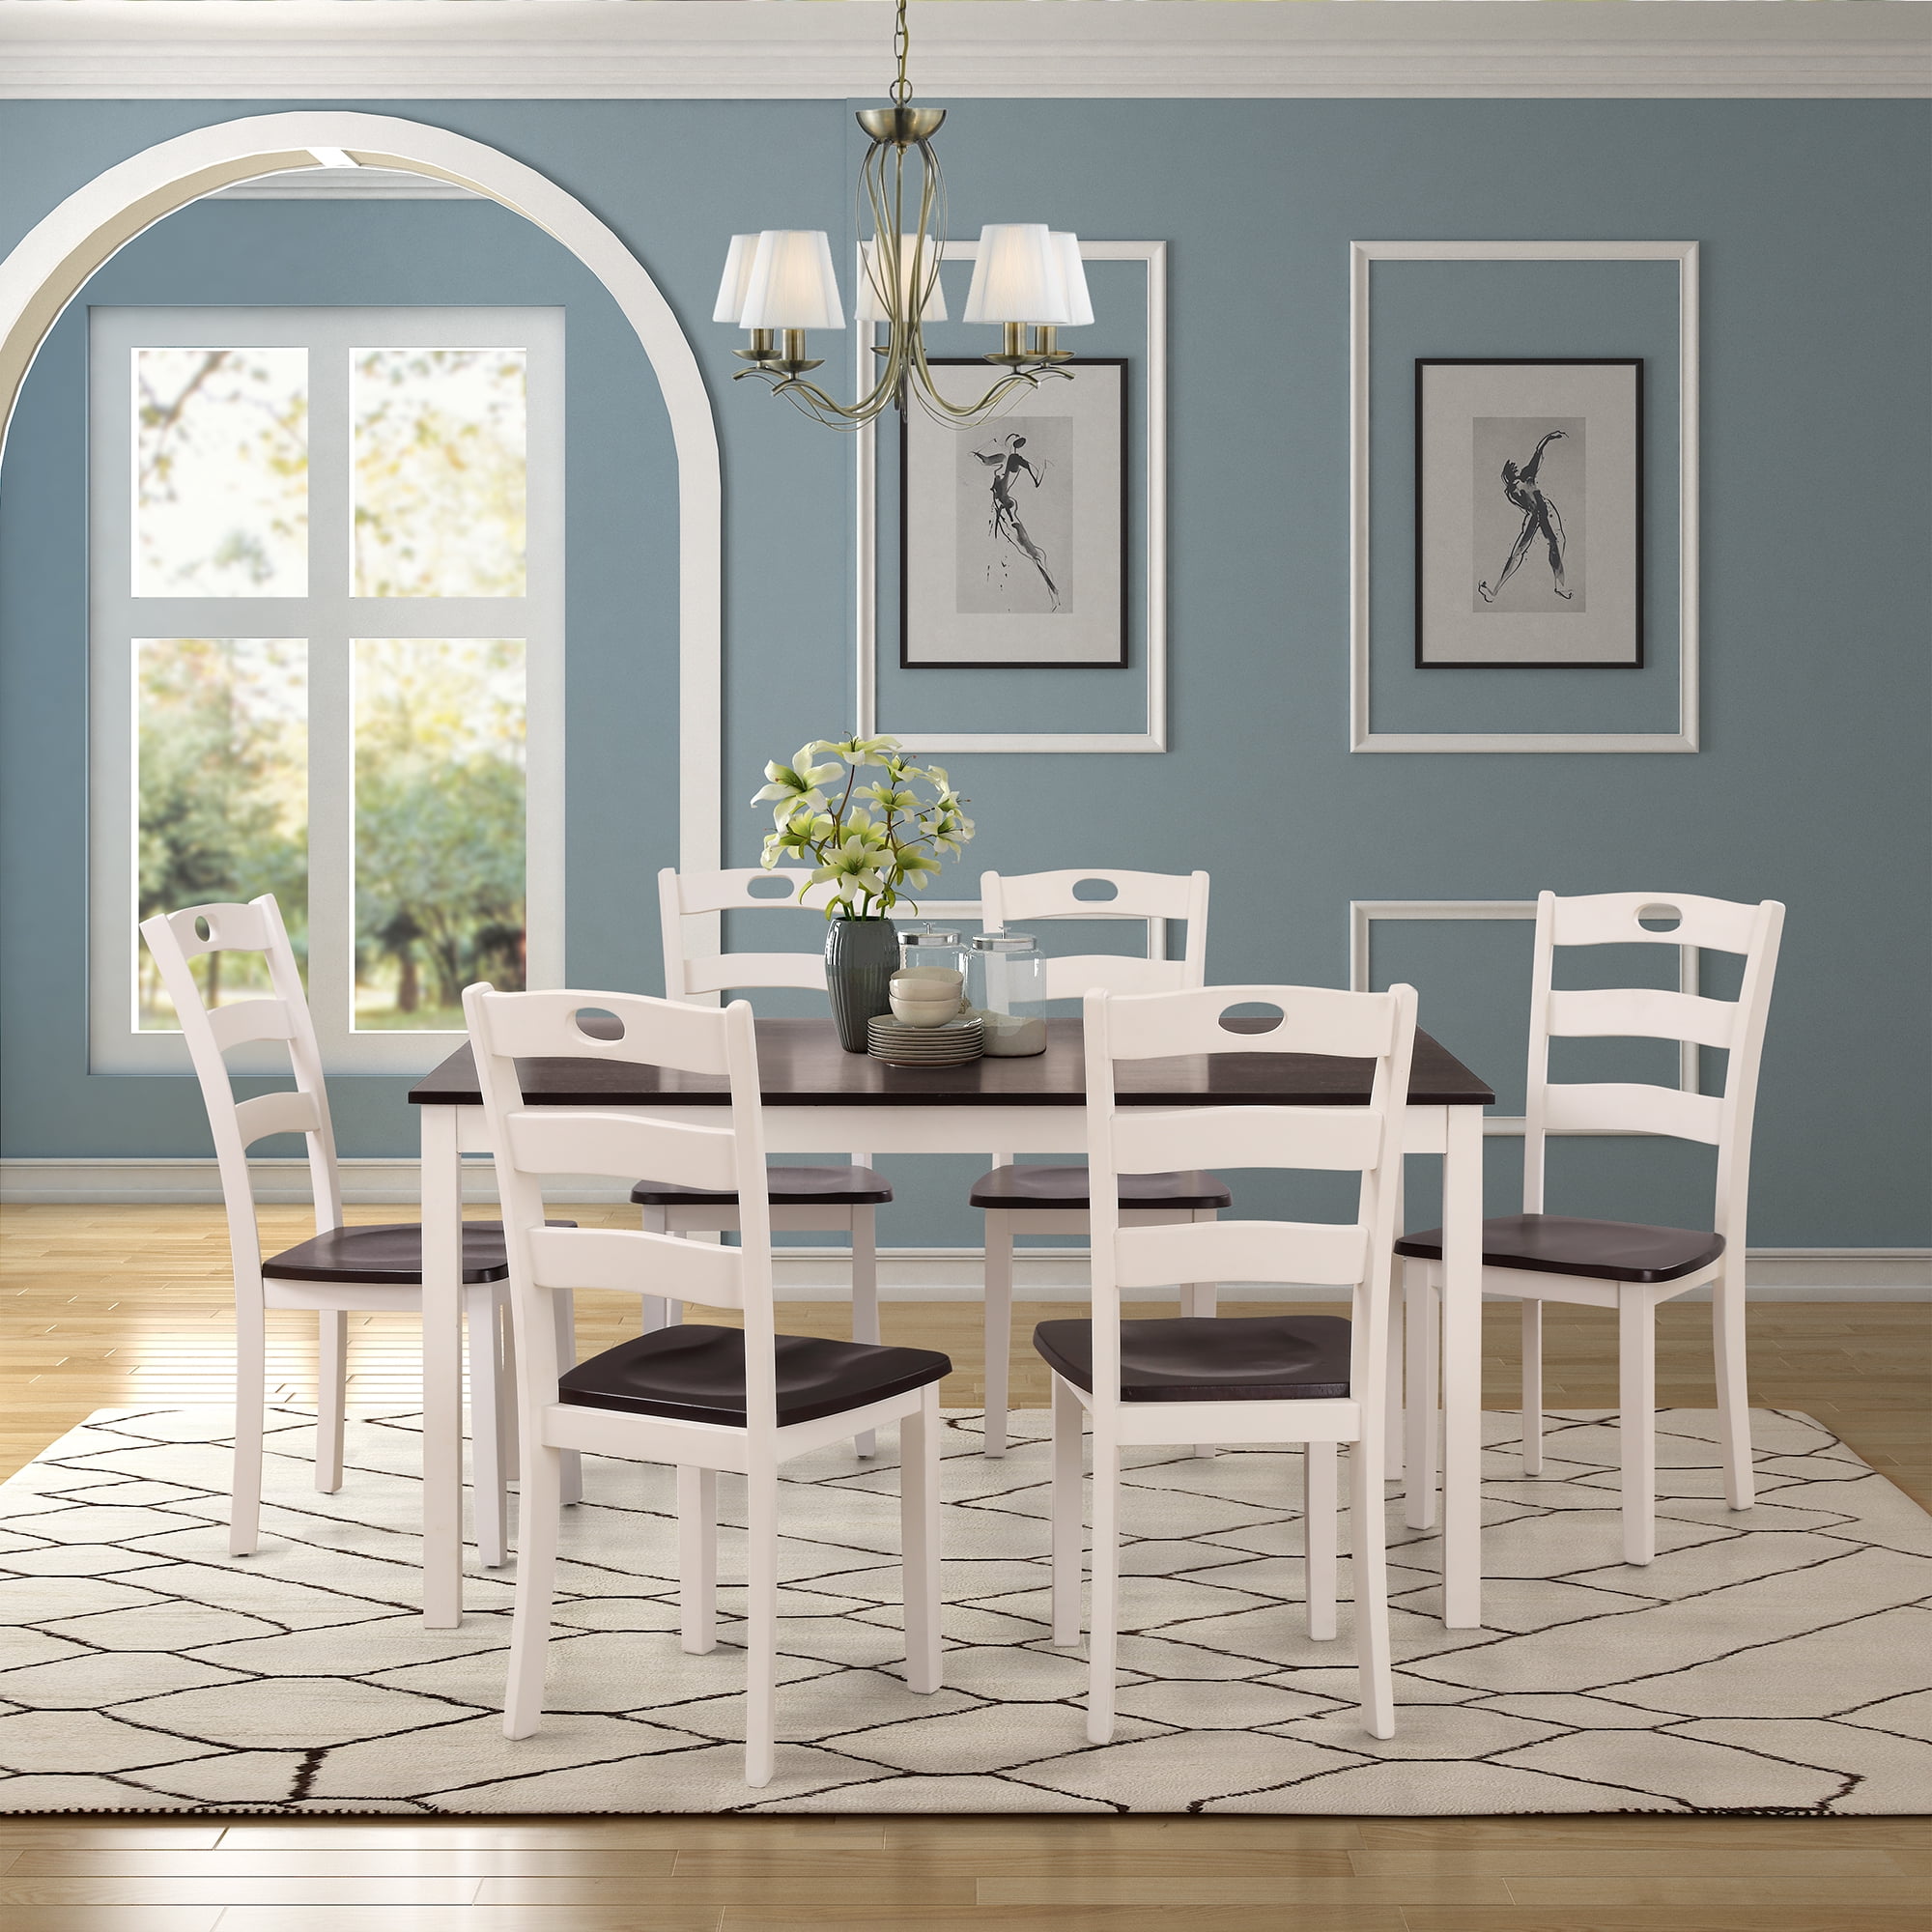 Clearance! 5 Piece Dining Table Set, Kitchen Table Sets ...